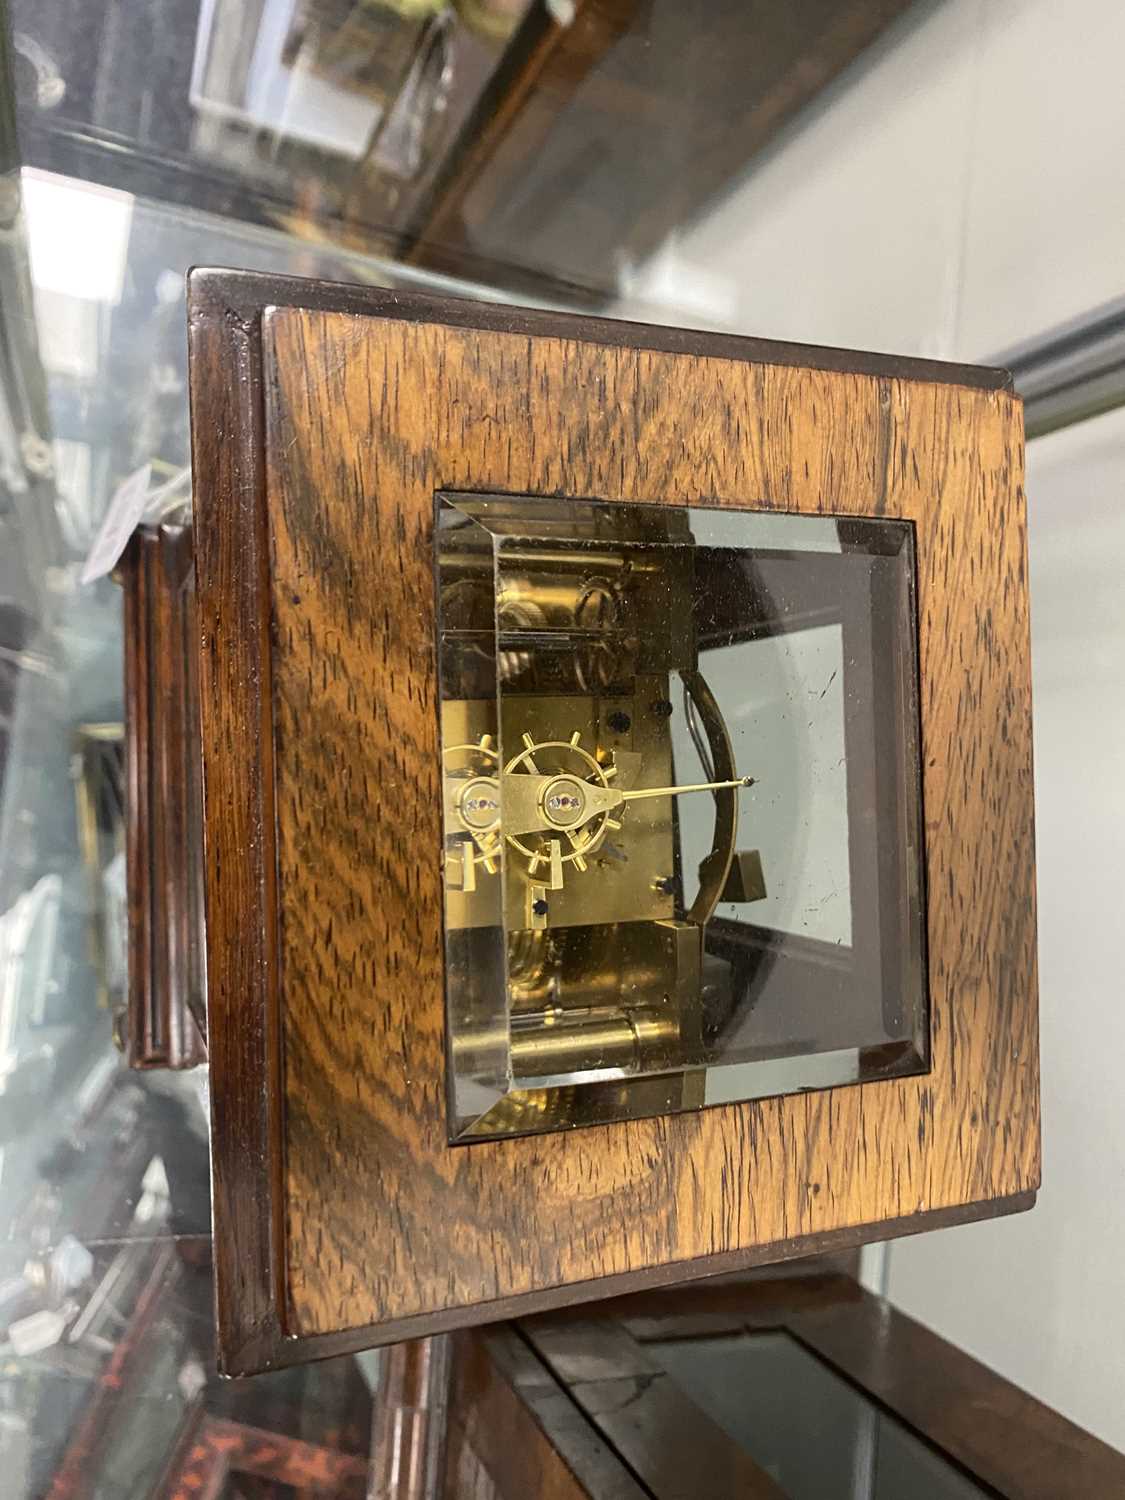 FRODSHAM, GRACECHURCH STREET, LONDON. A FINE AND SMALL ROSEWOOD DOUBLE FUSEE LIBRARY CLOCK WITH LEVE - Image 10 of 13